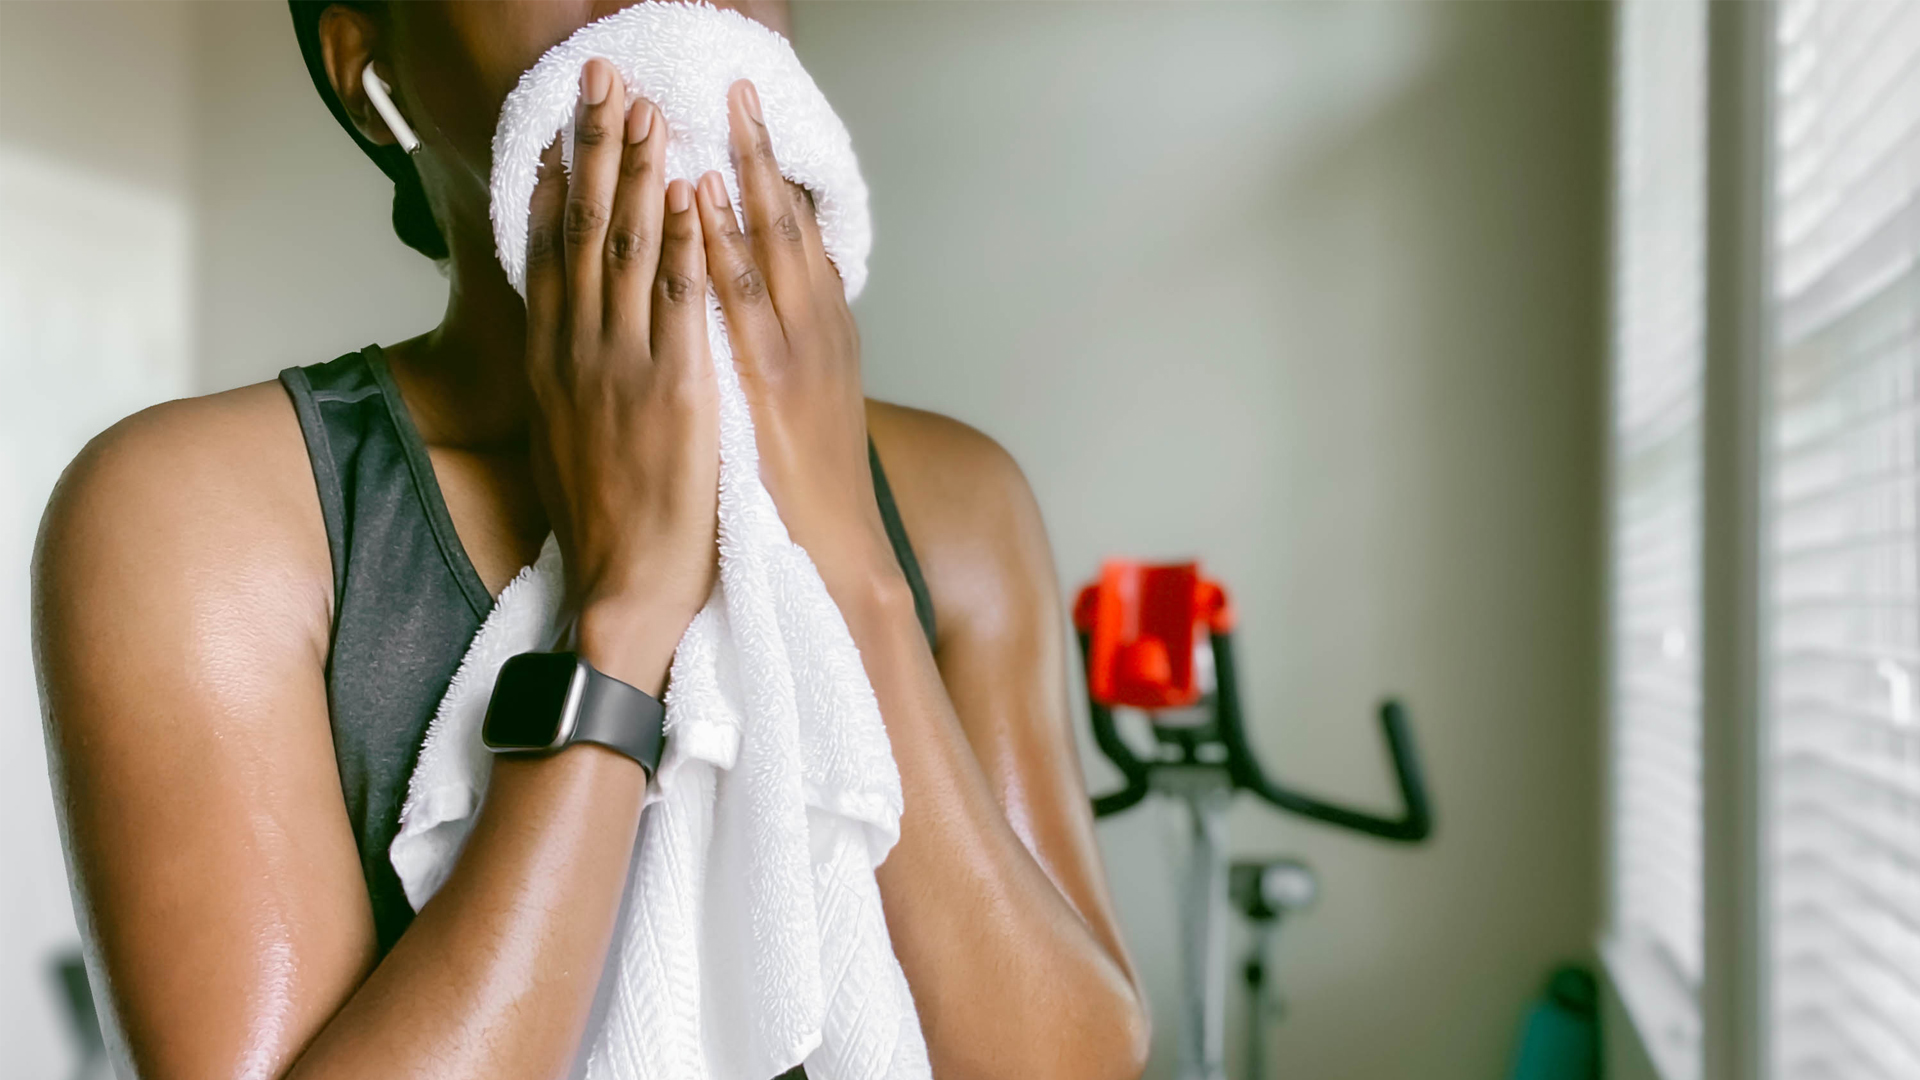 Image of woman after exercising on stationary bike